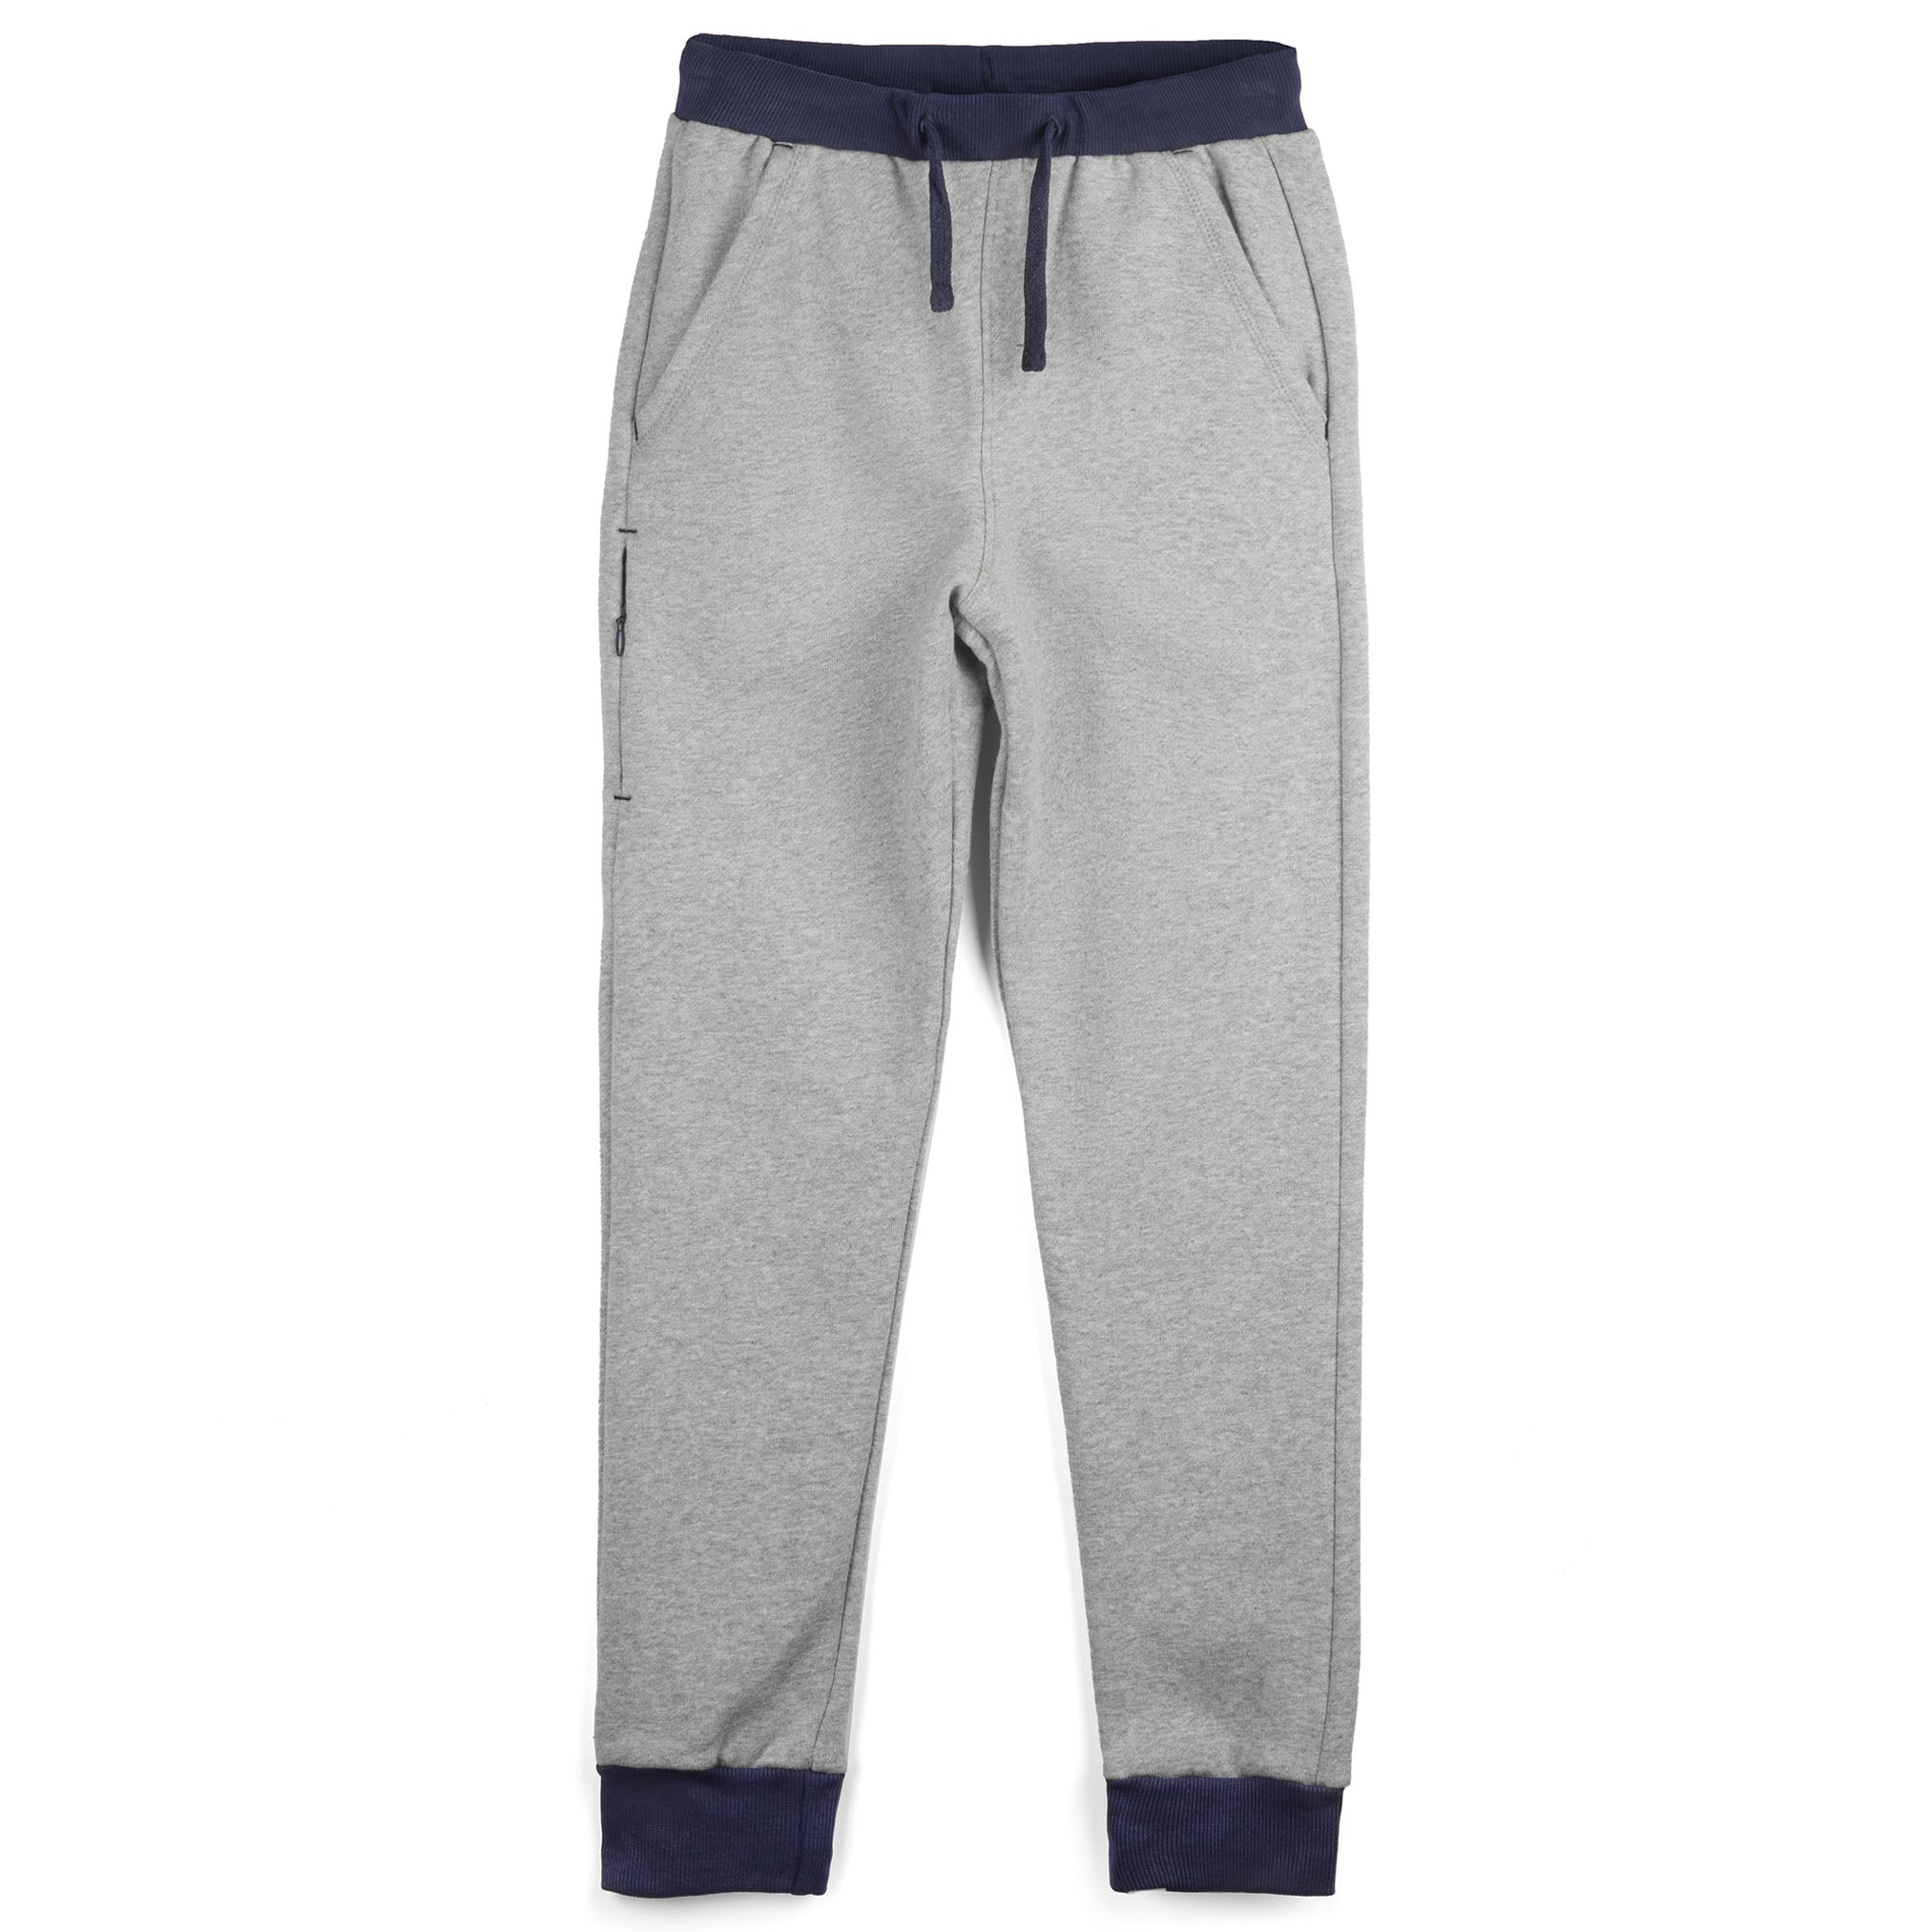 Sweatpants made of organic cotton in light grey